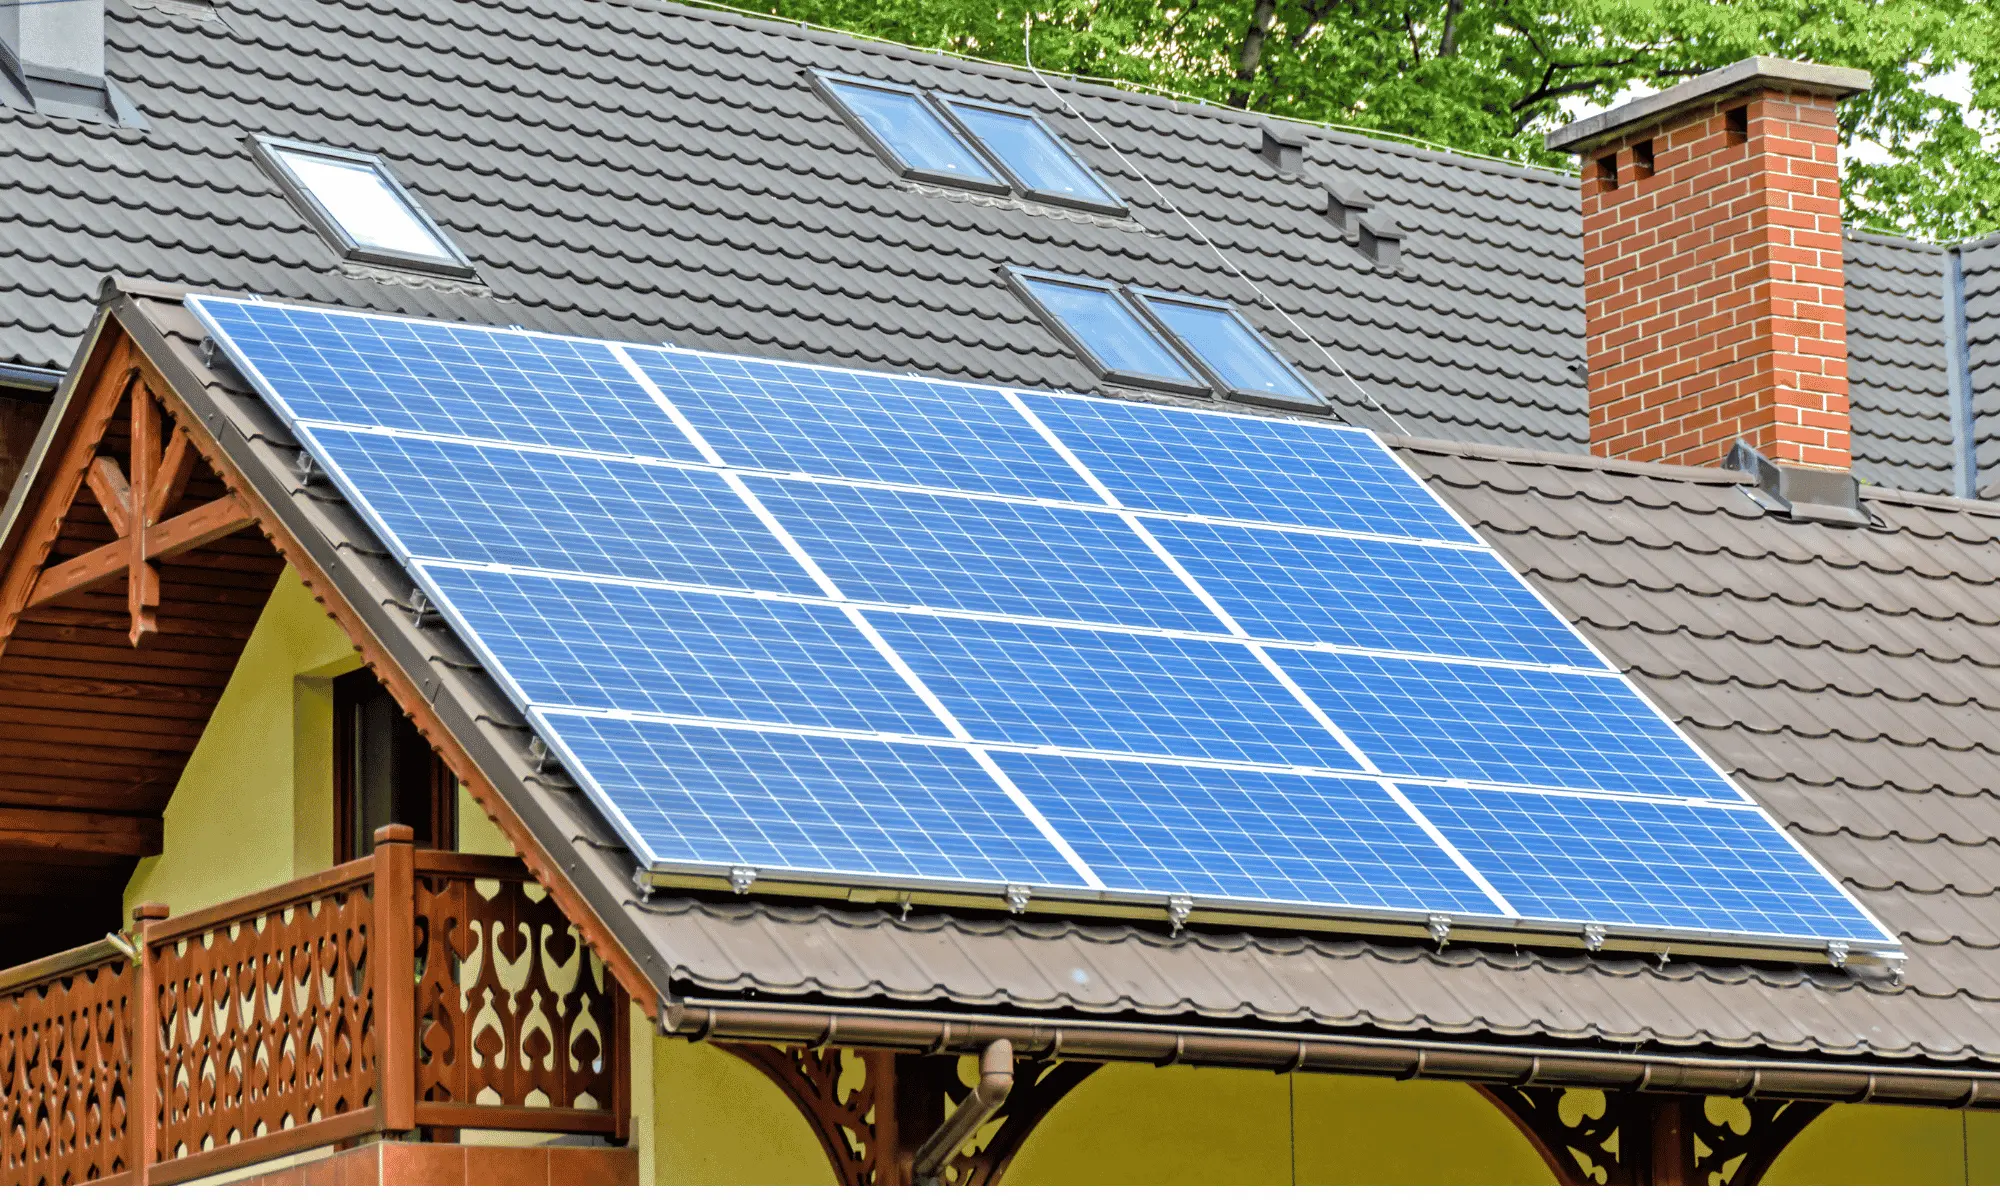 best place to buy solar panels uk - What is the best company in the UK for solar panels